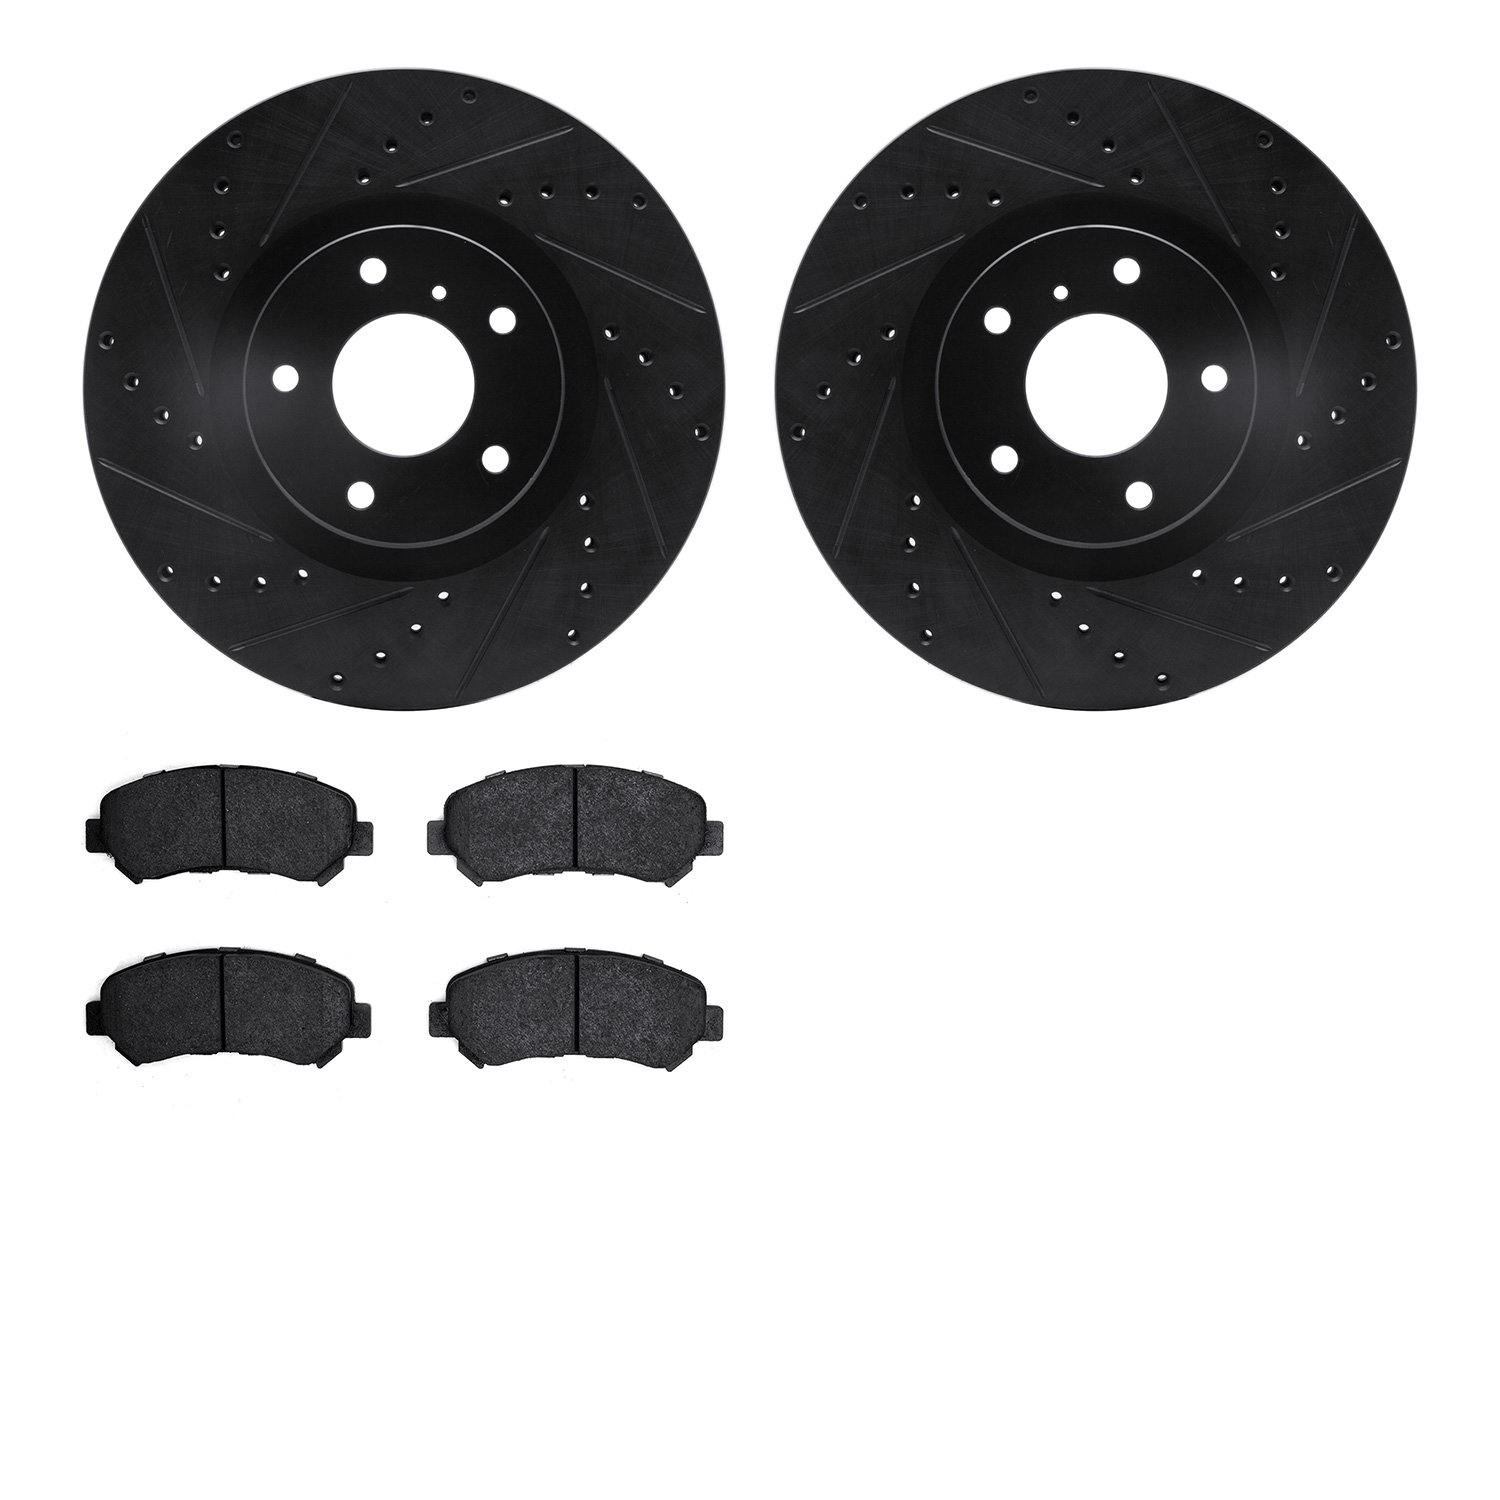 8302-67115 Drilled/Slotted Brake Rotors with 3000-Series Ceramic Brake Pads Kit [Black], Fits Select Infiniti/Nissan, Position: